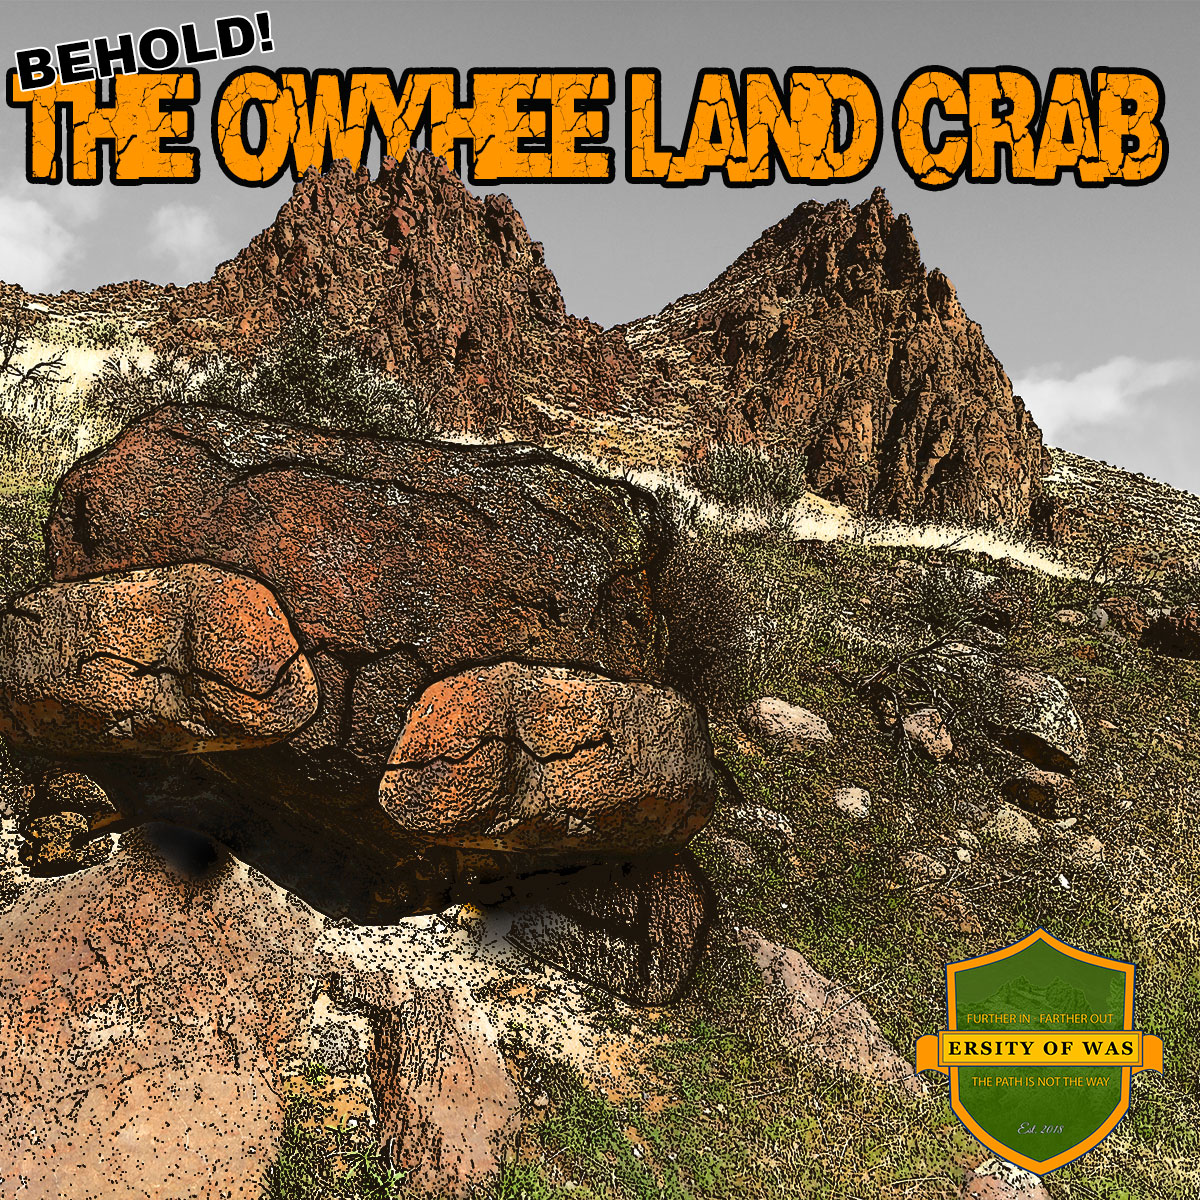 Read more about the article Campus Legends: The Owyhee Land Crab